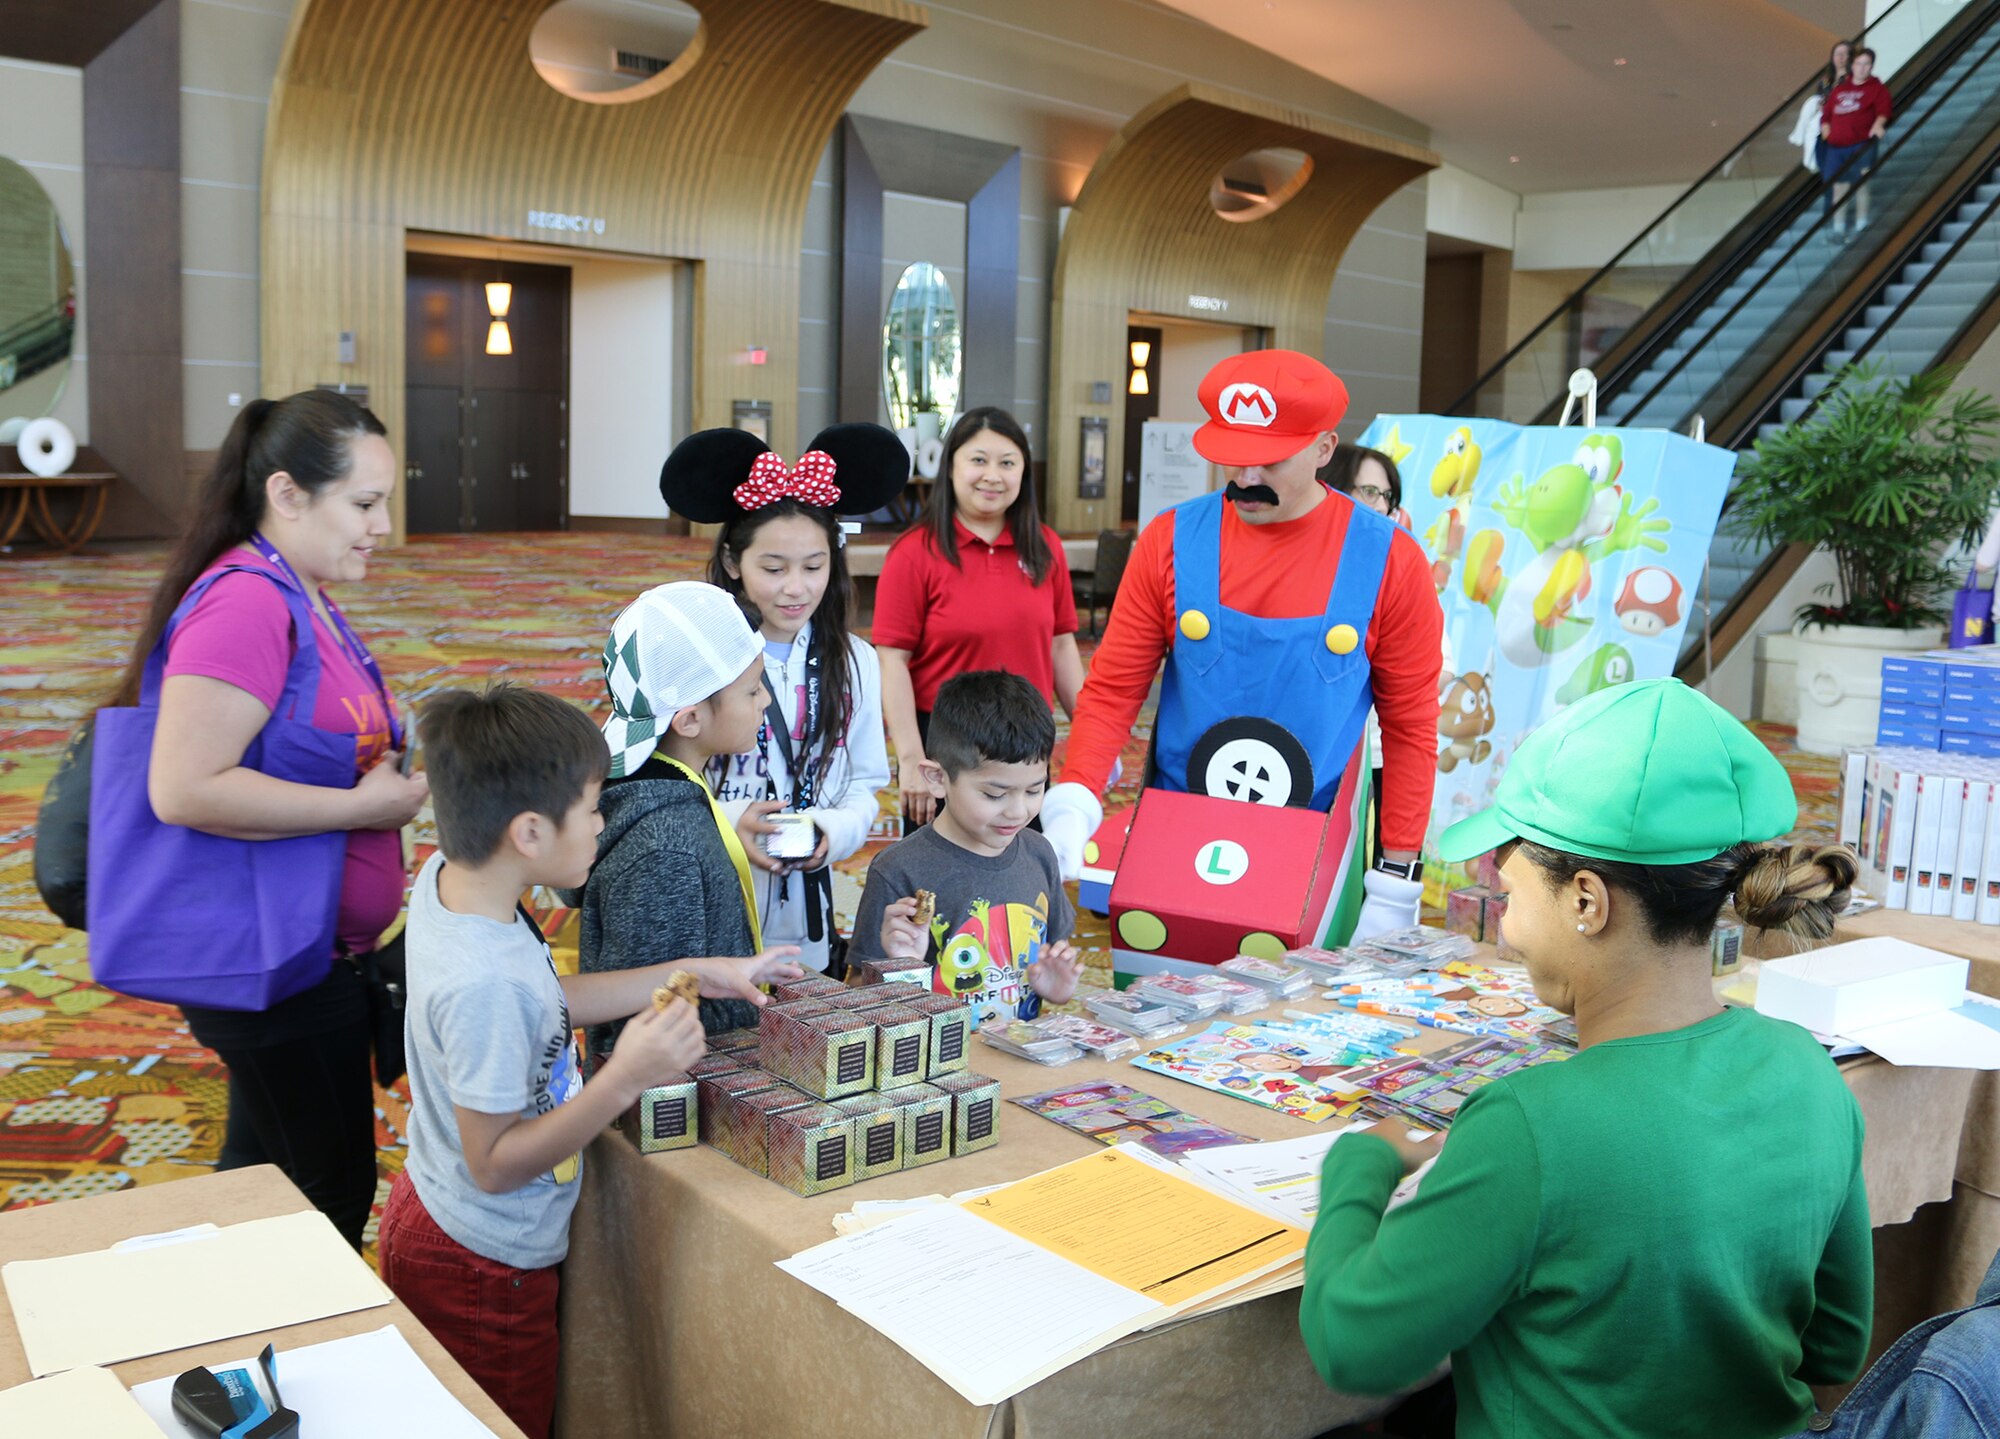 The family of Senior Airman Faustino Estrada, 445th Logistics Readiness Squadron, registers at a Mario themed table during the Yellow Ribbon Reintegration Program held in Orlando, Florida March 16, 2018